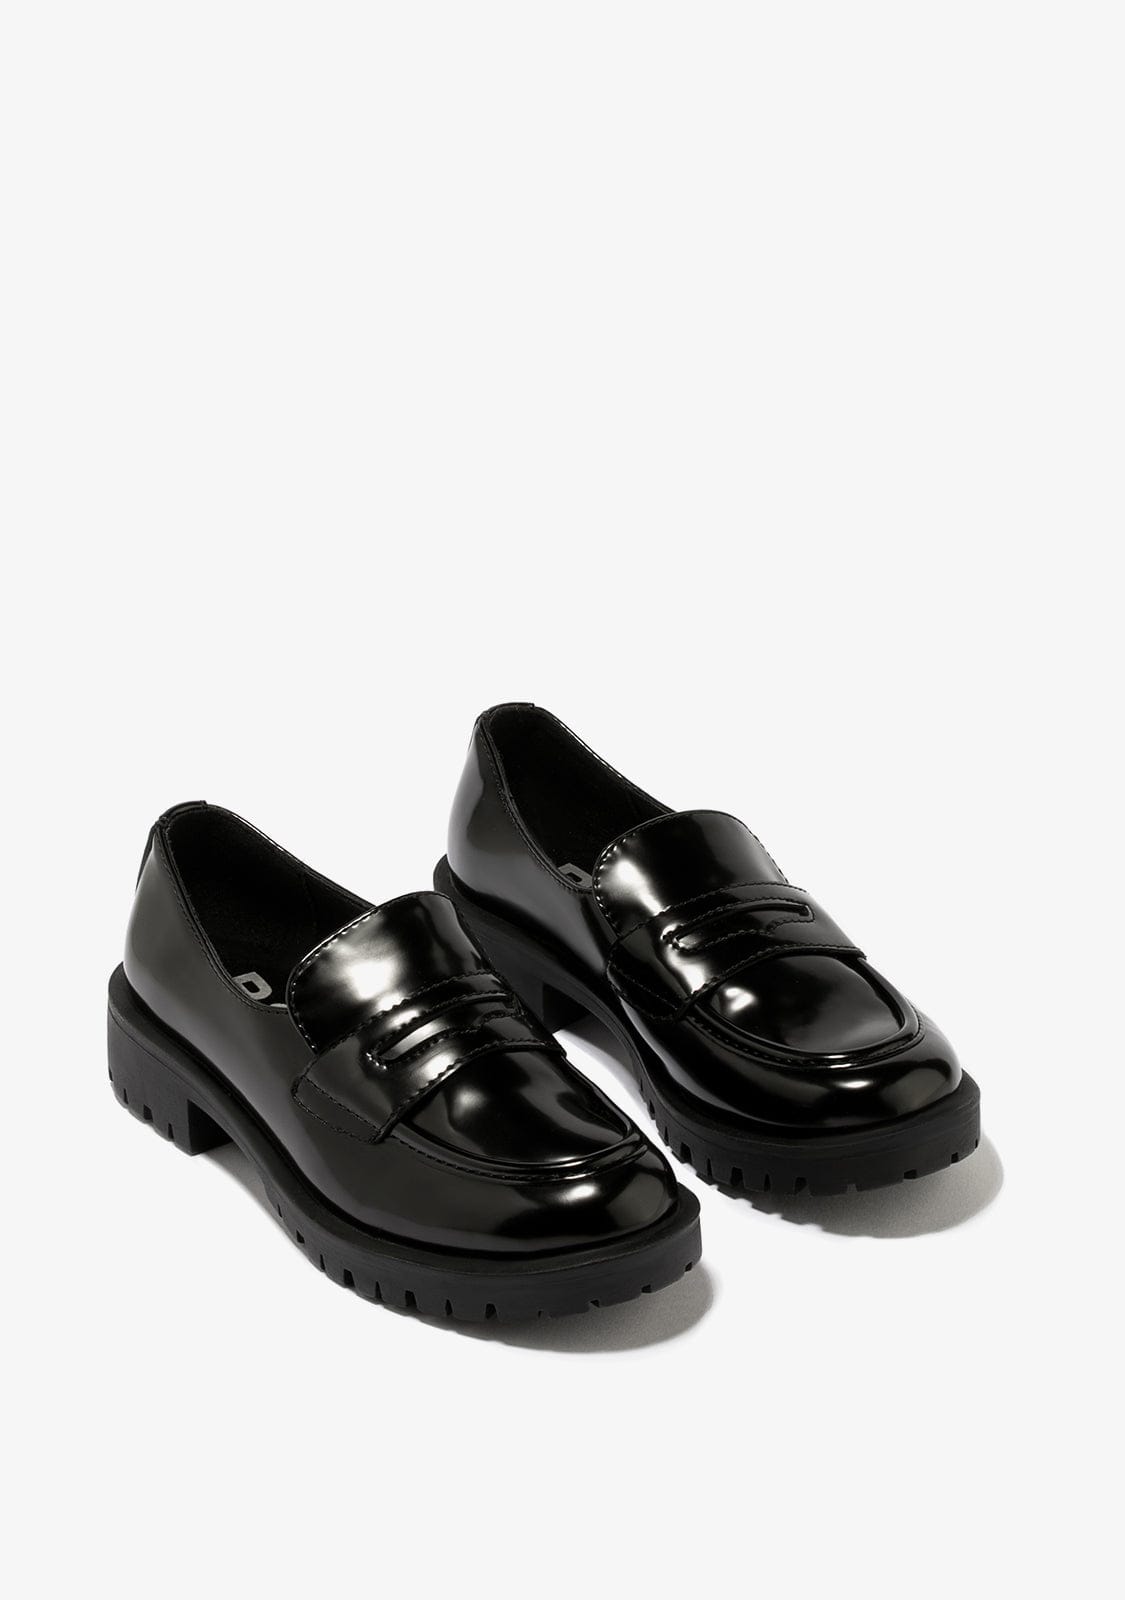 B&W JUNIOR Shoes Girl's Black Loafers B&W